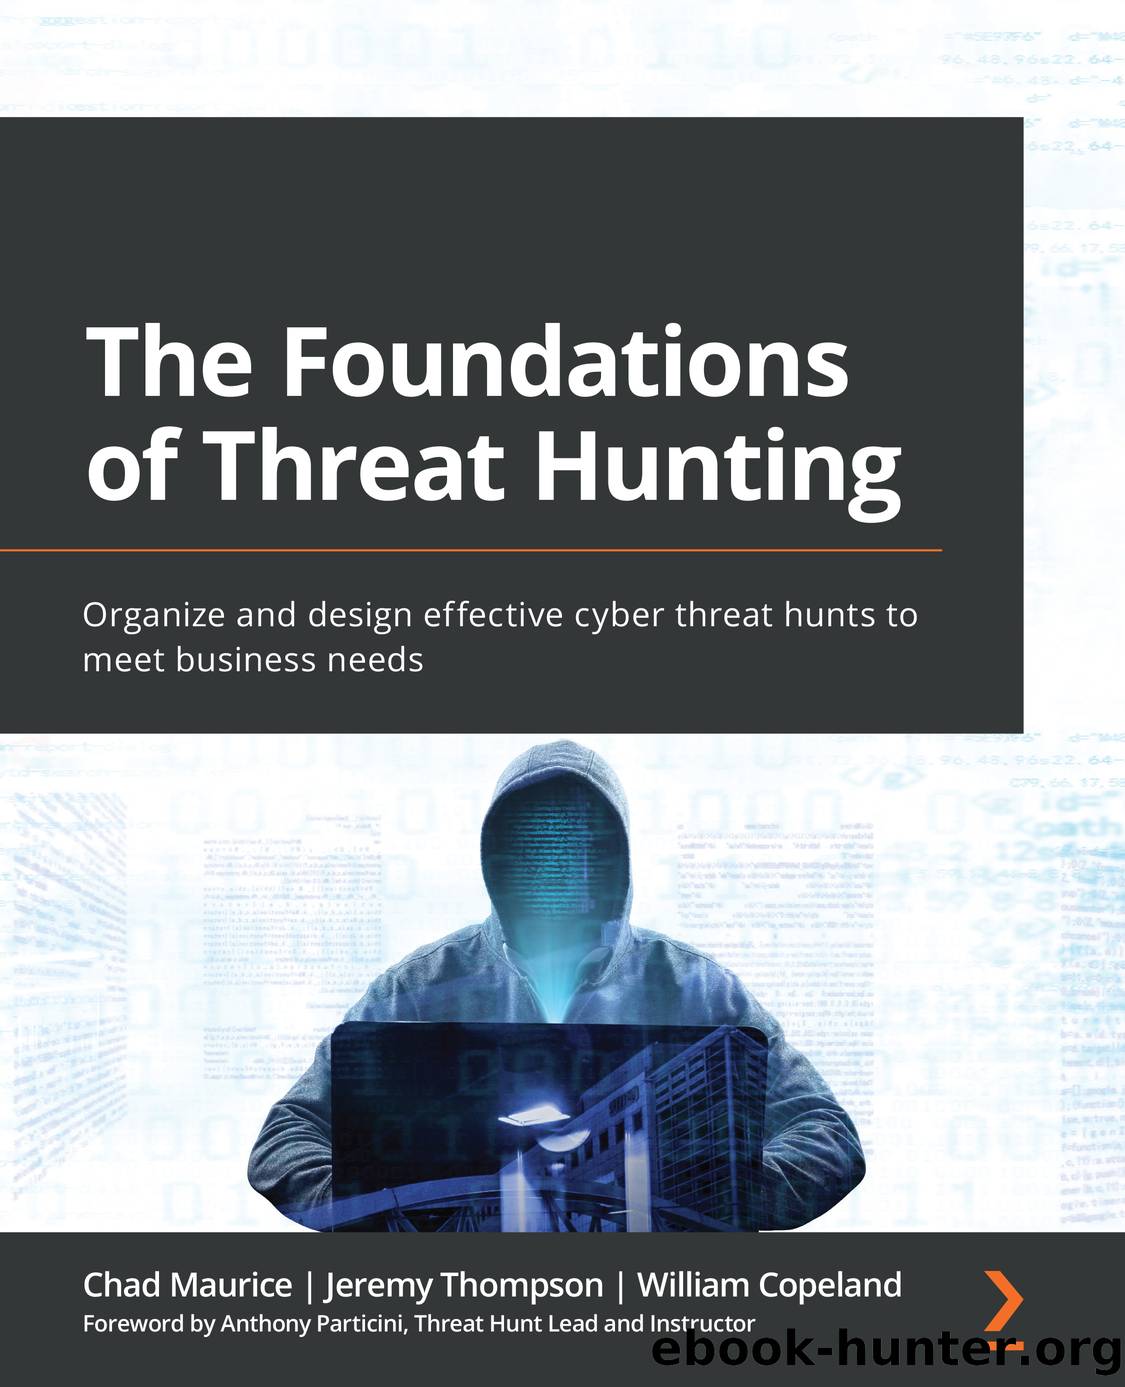 The Foundations of Threat Hunting by Chad Maurice & Jeremy Thompson & William Copeland